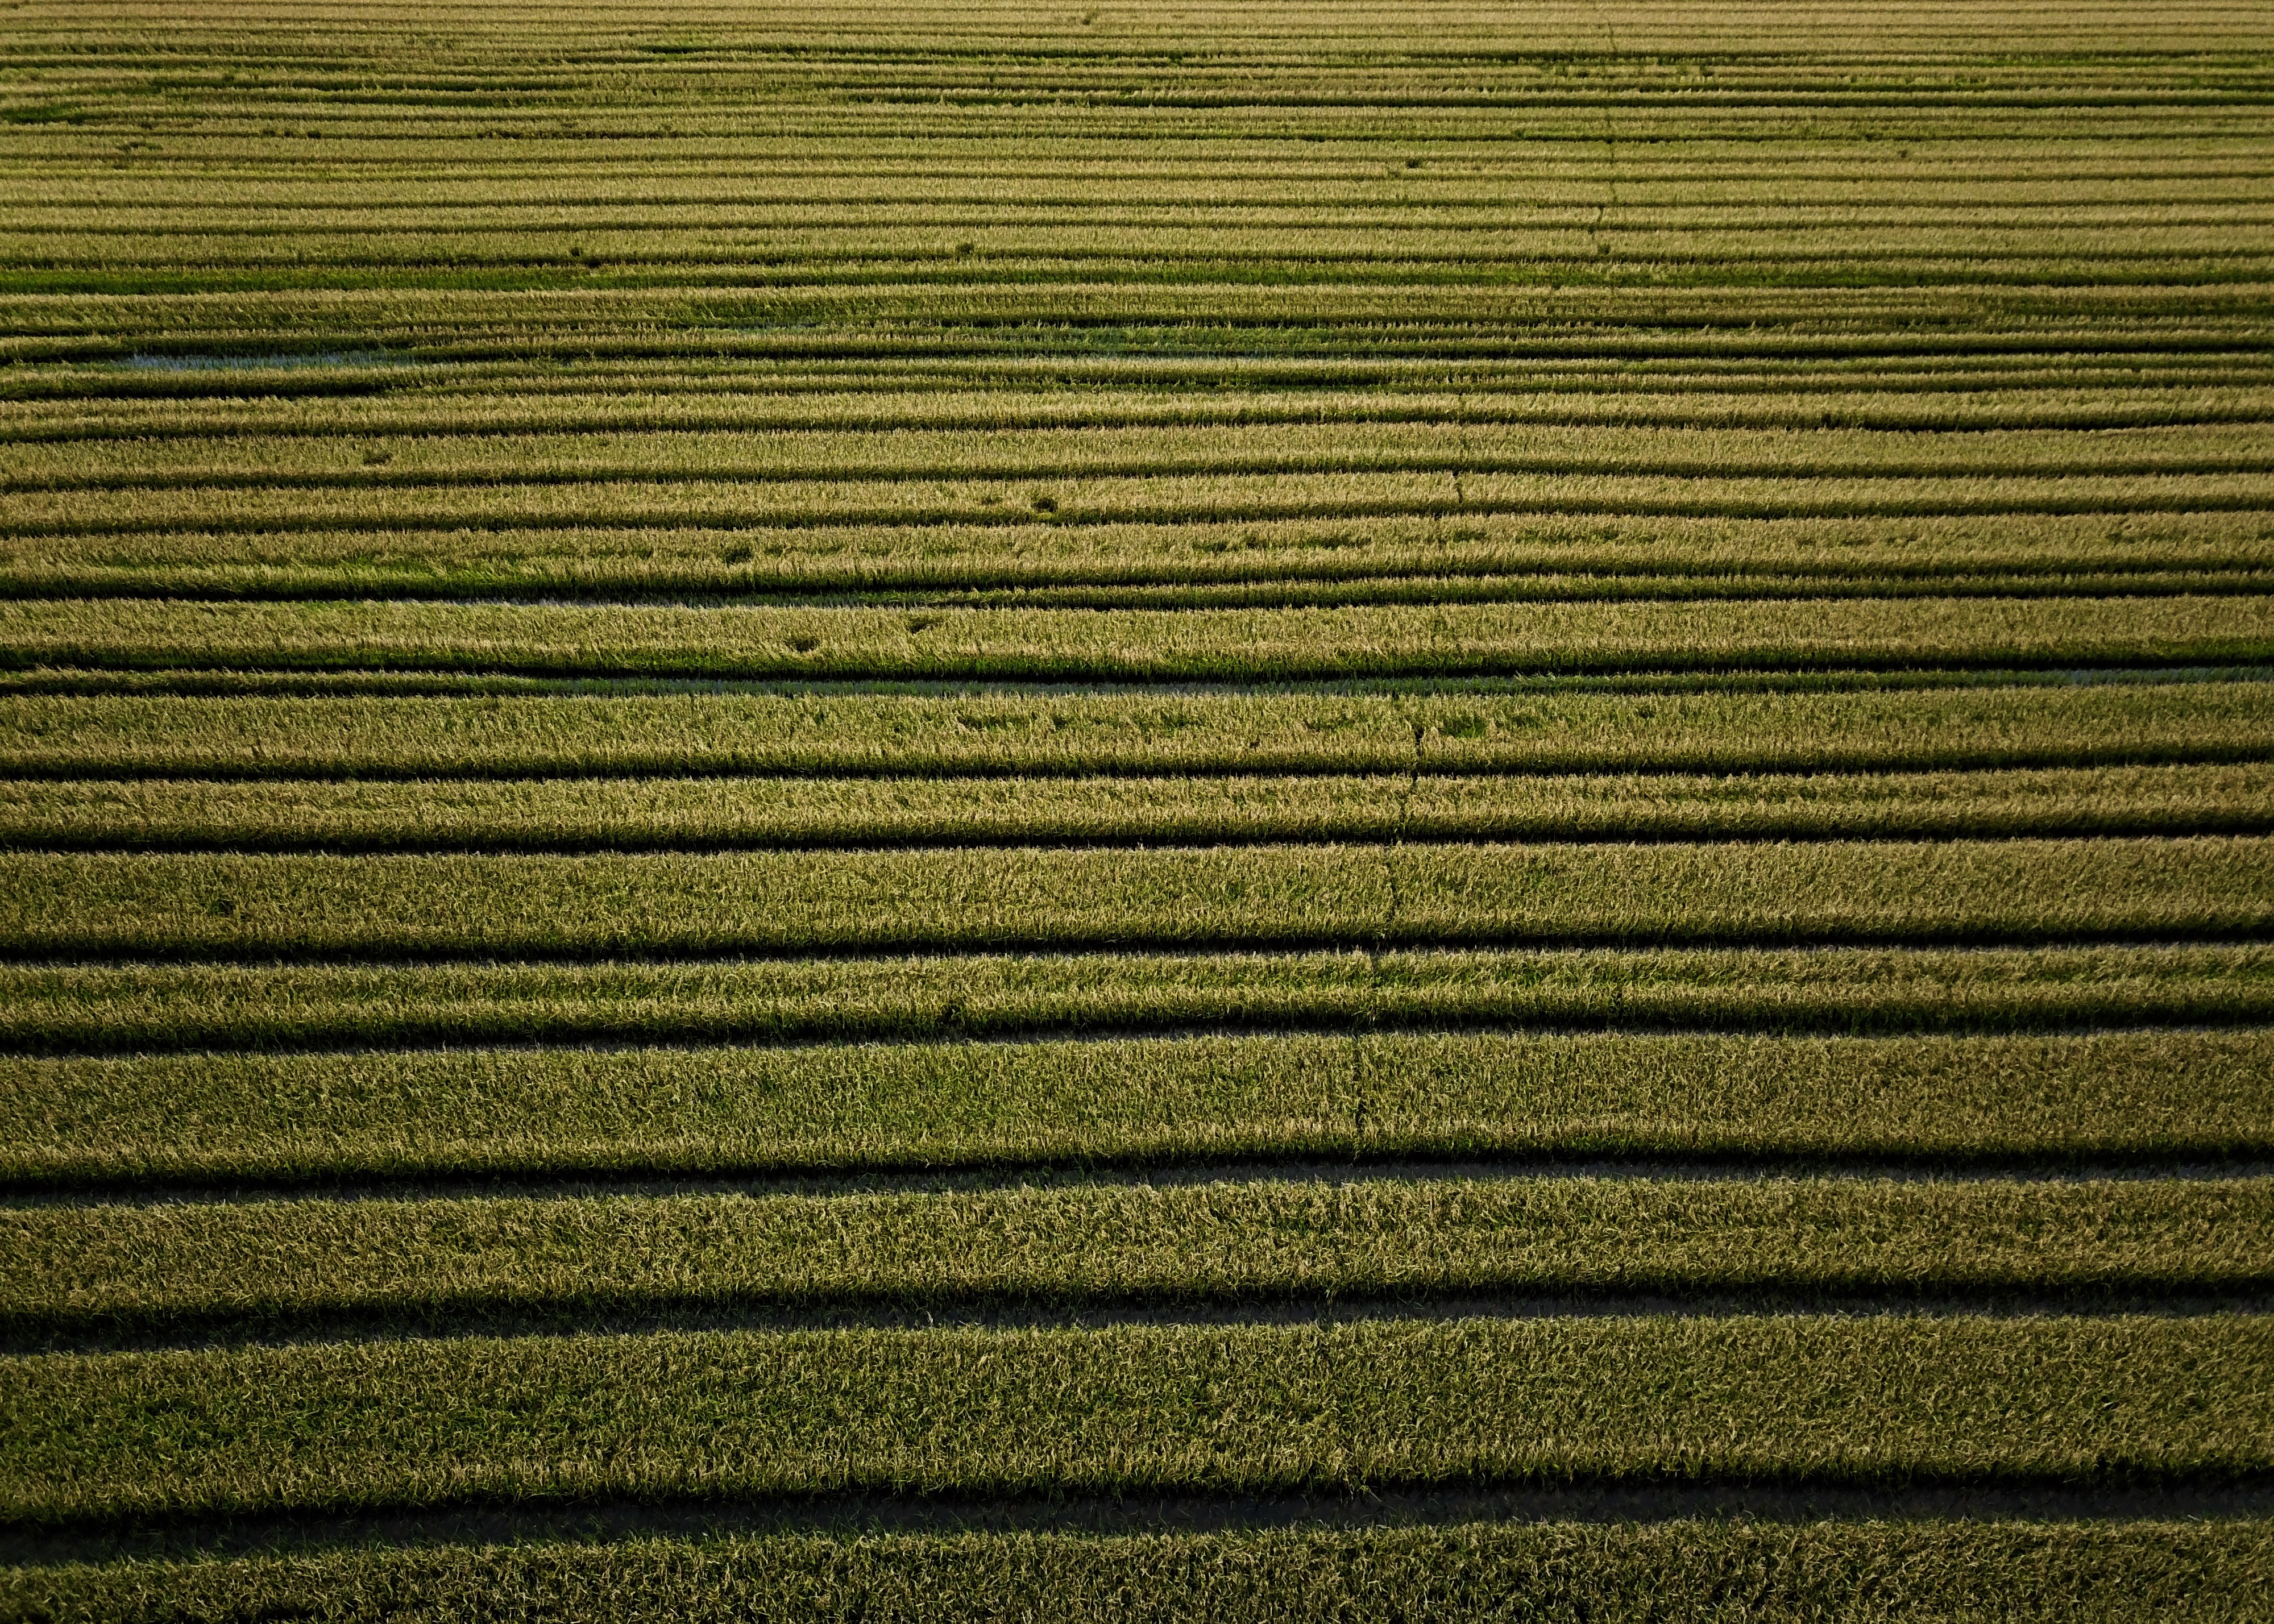 Lines formed through a flooded rice field in central Louisiana